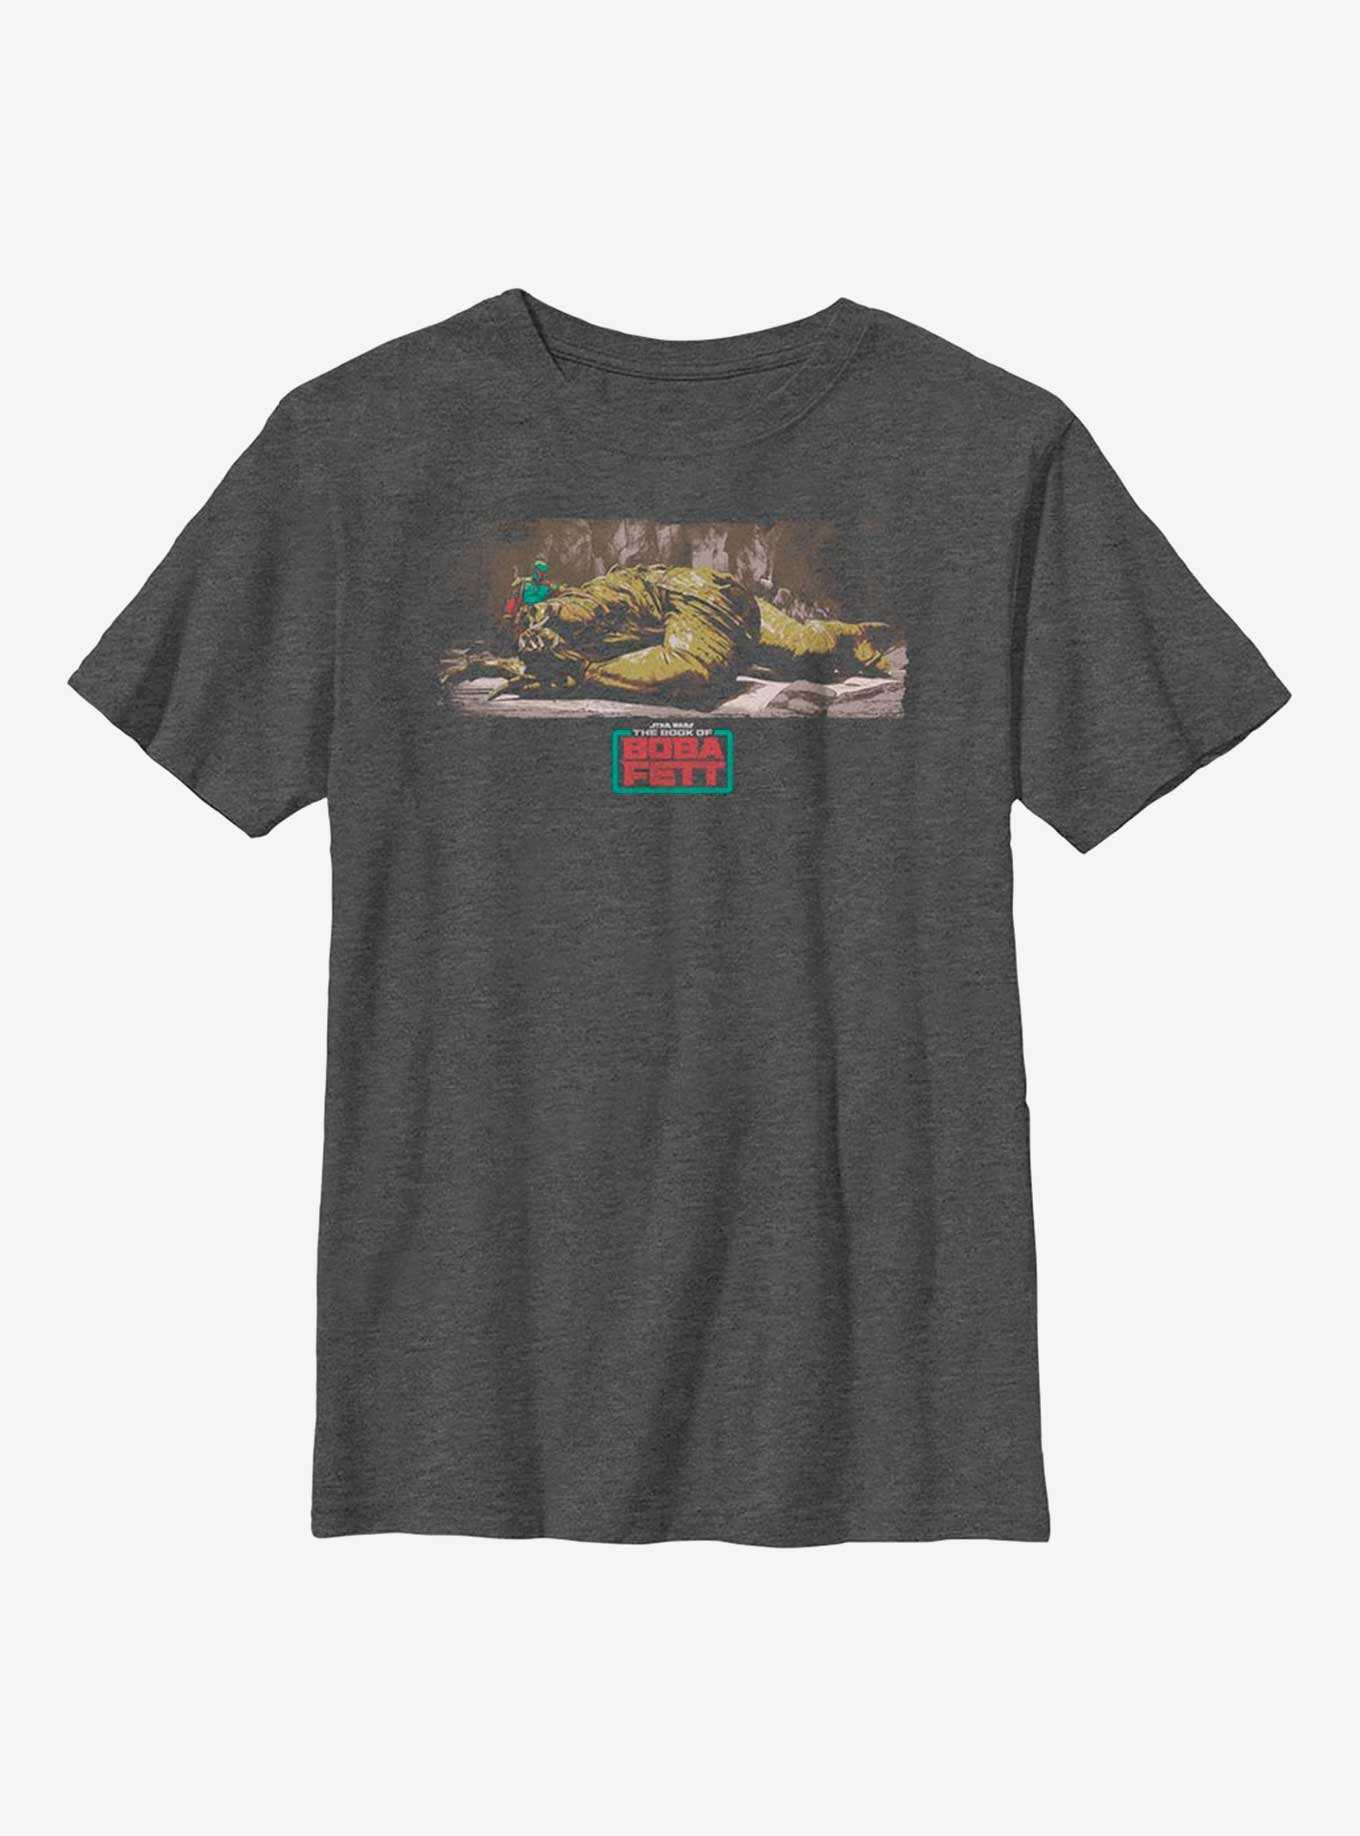 Star Wars The Book Of Boba Fett Who's A Good Boy Youth T-Shirt, , hi-res